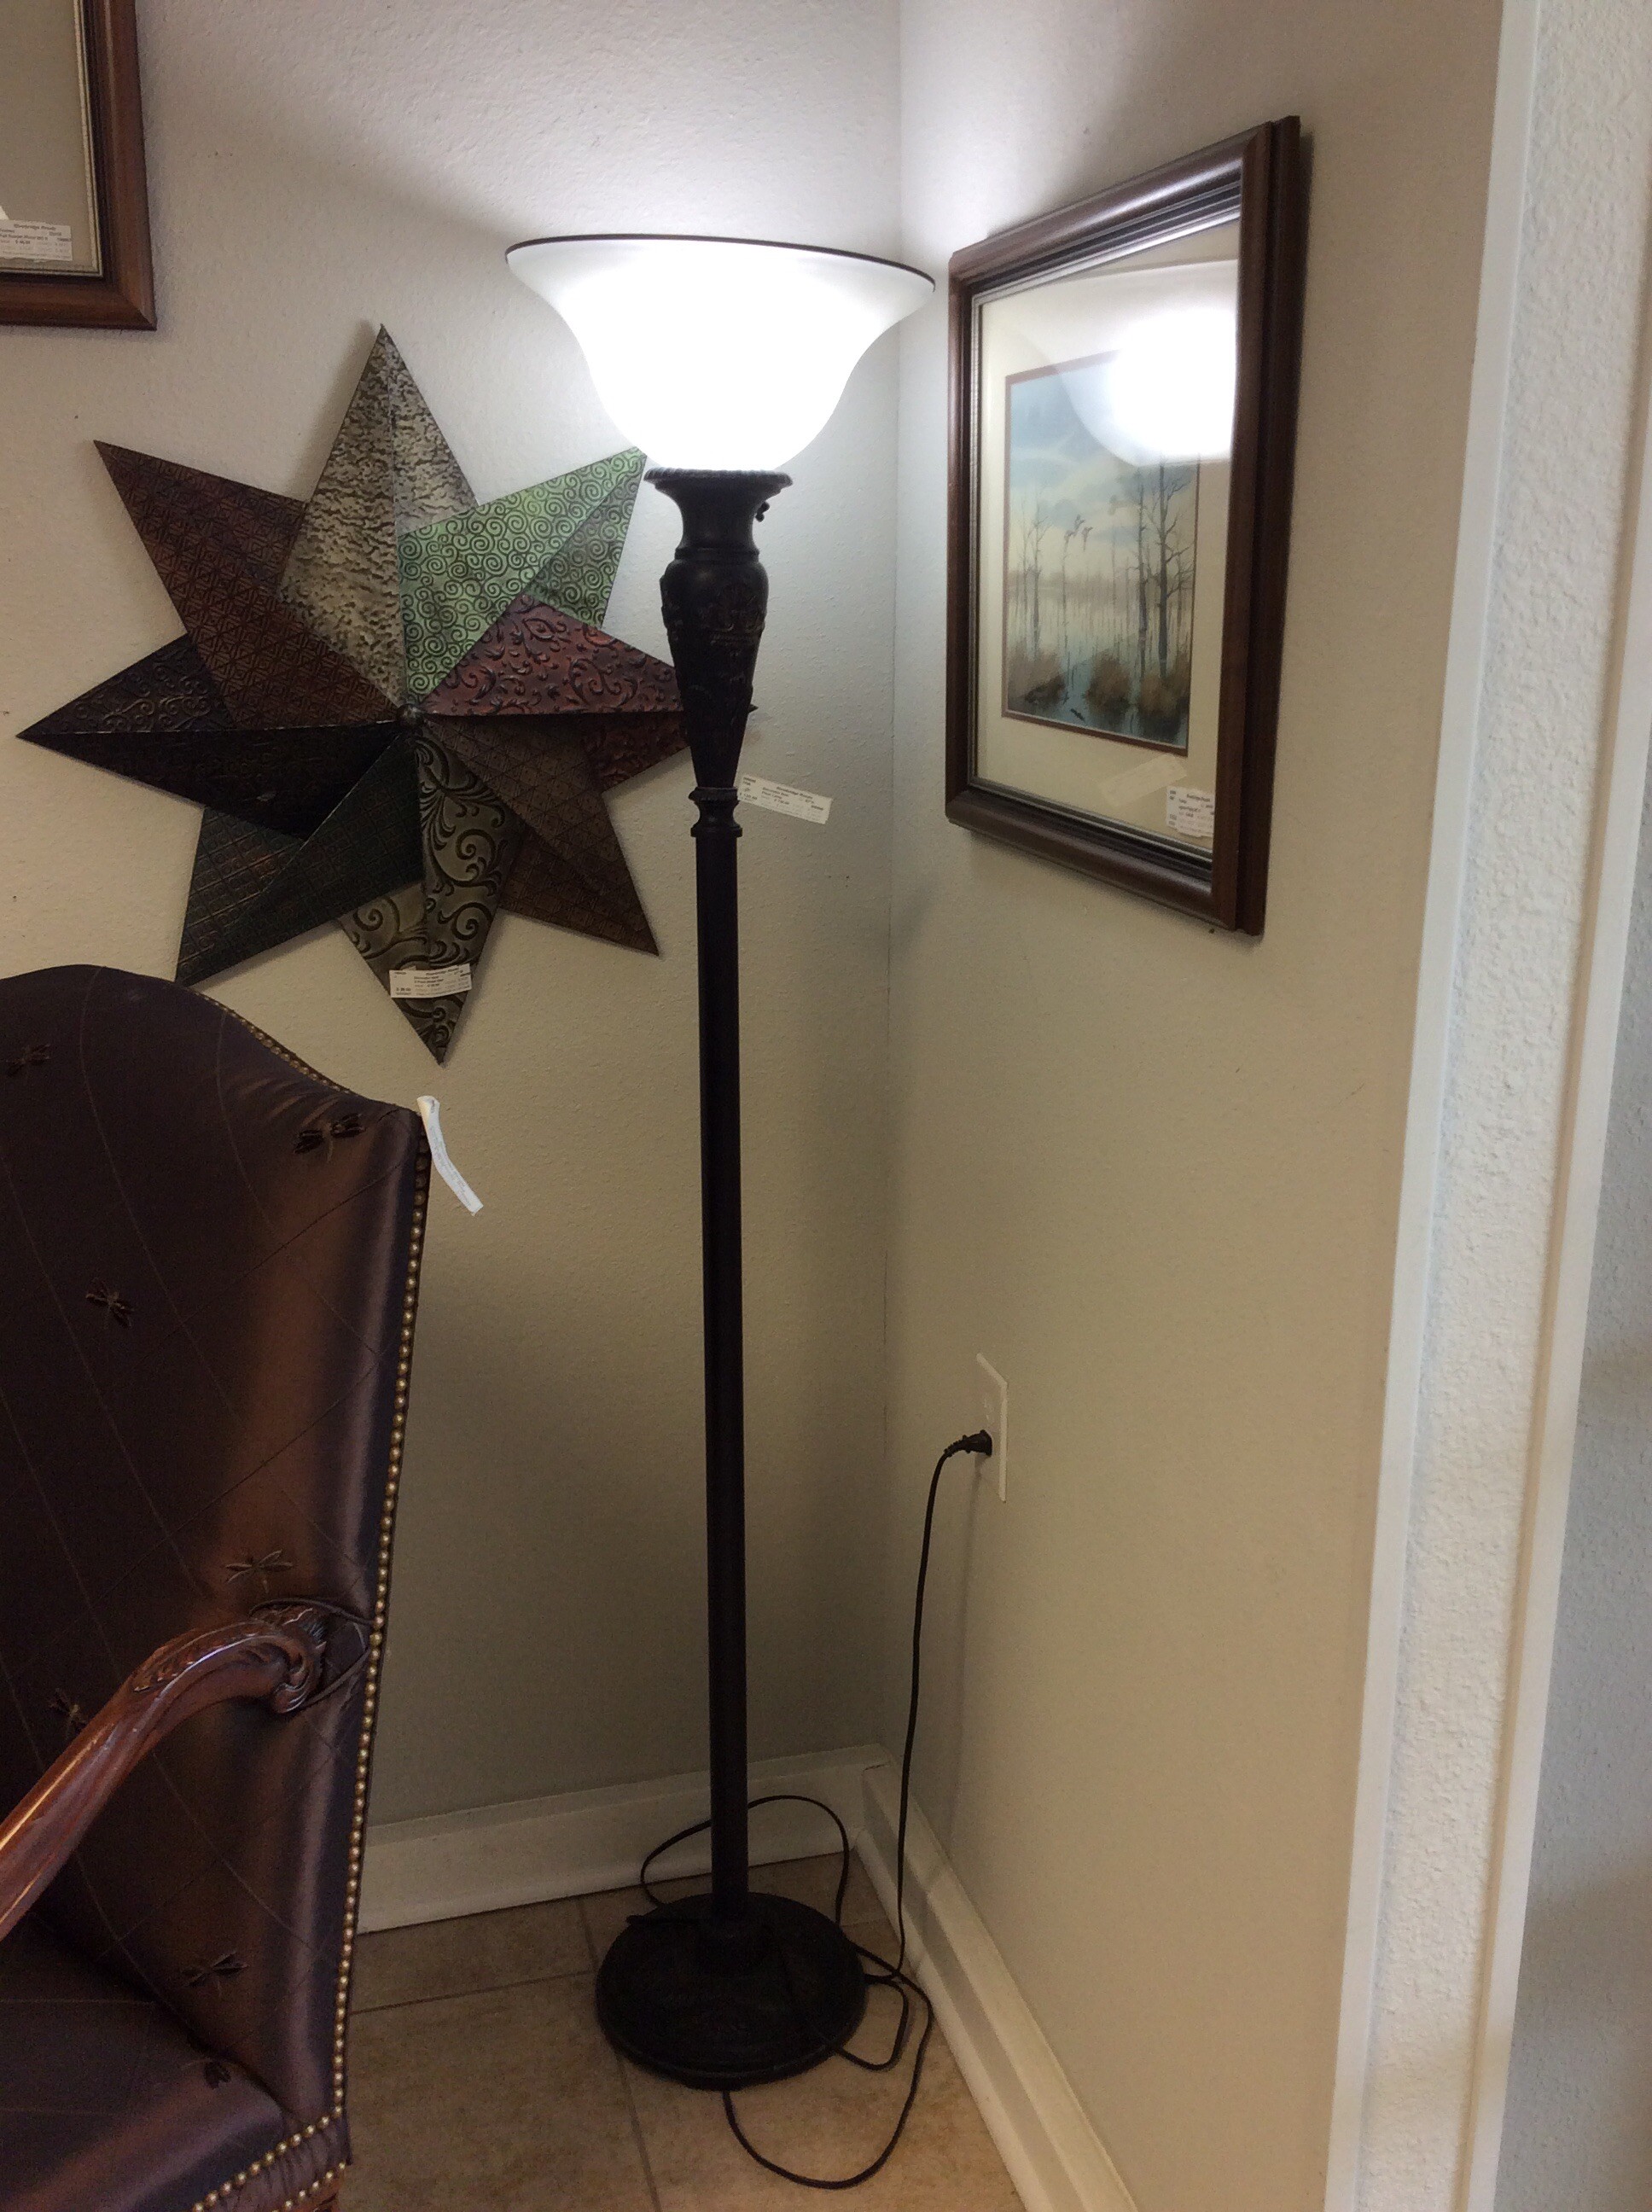 This floor lamp features a tall, slim black base with vintagy embellishments and a white uplight.